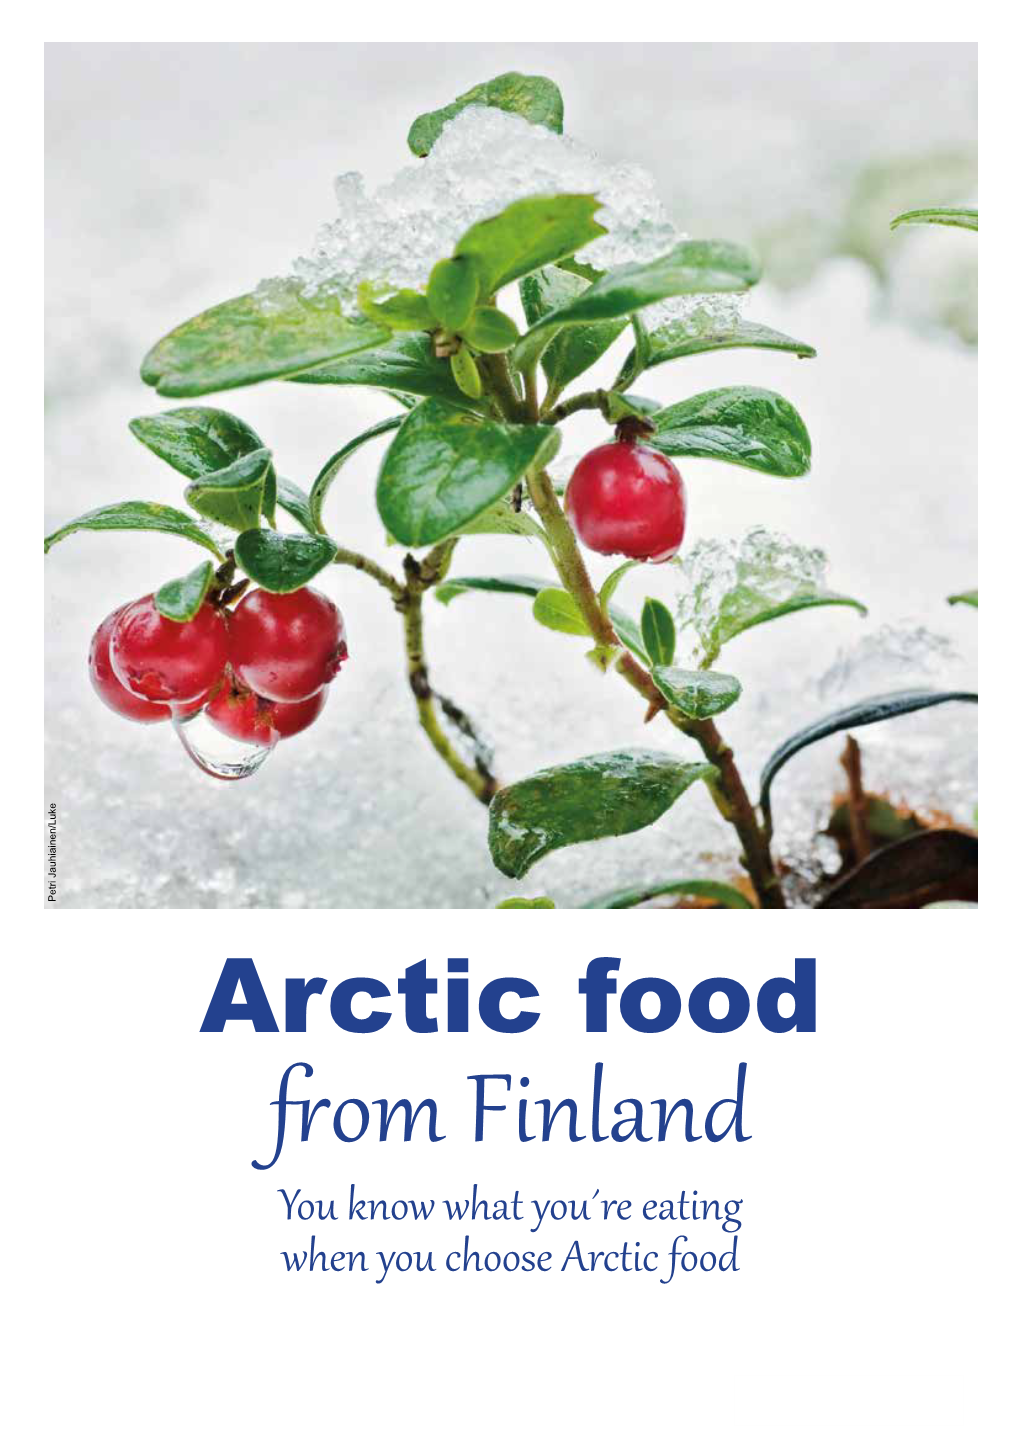 Artic Food from Finland English Brochure for Marketers